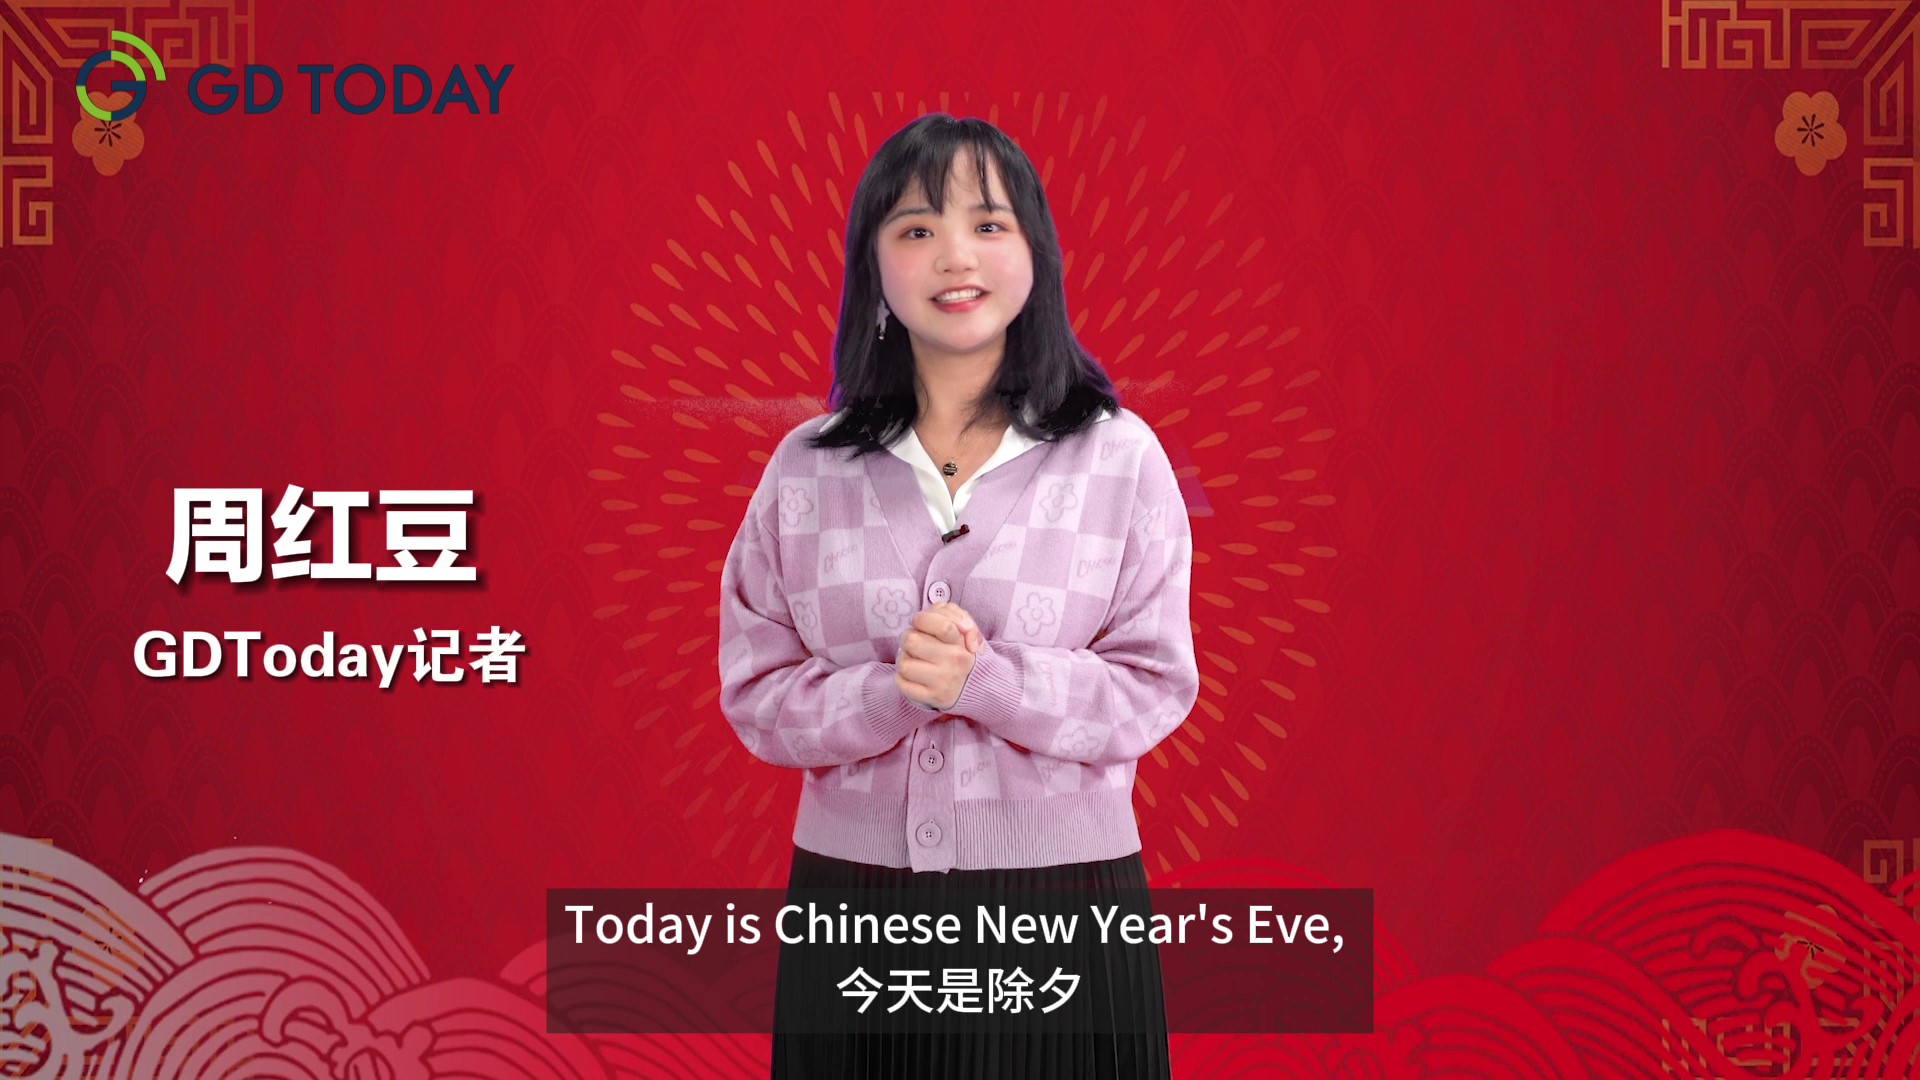 Fun Explanation of CNY | Glimpse into Guangdong